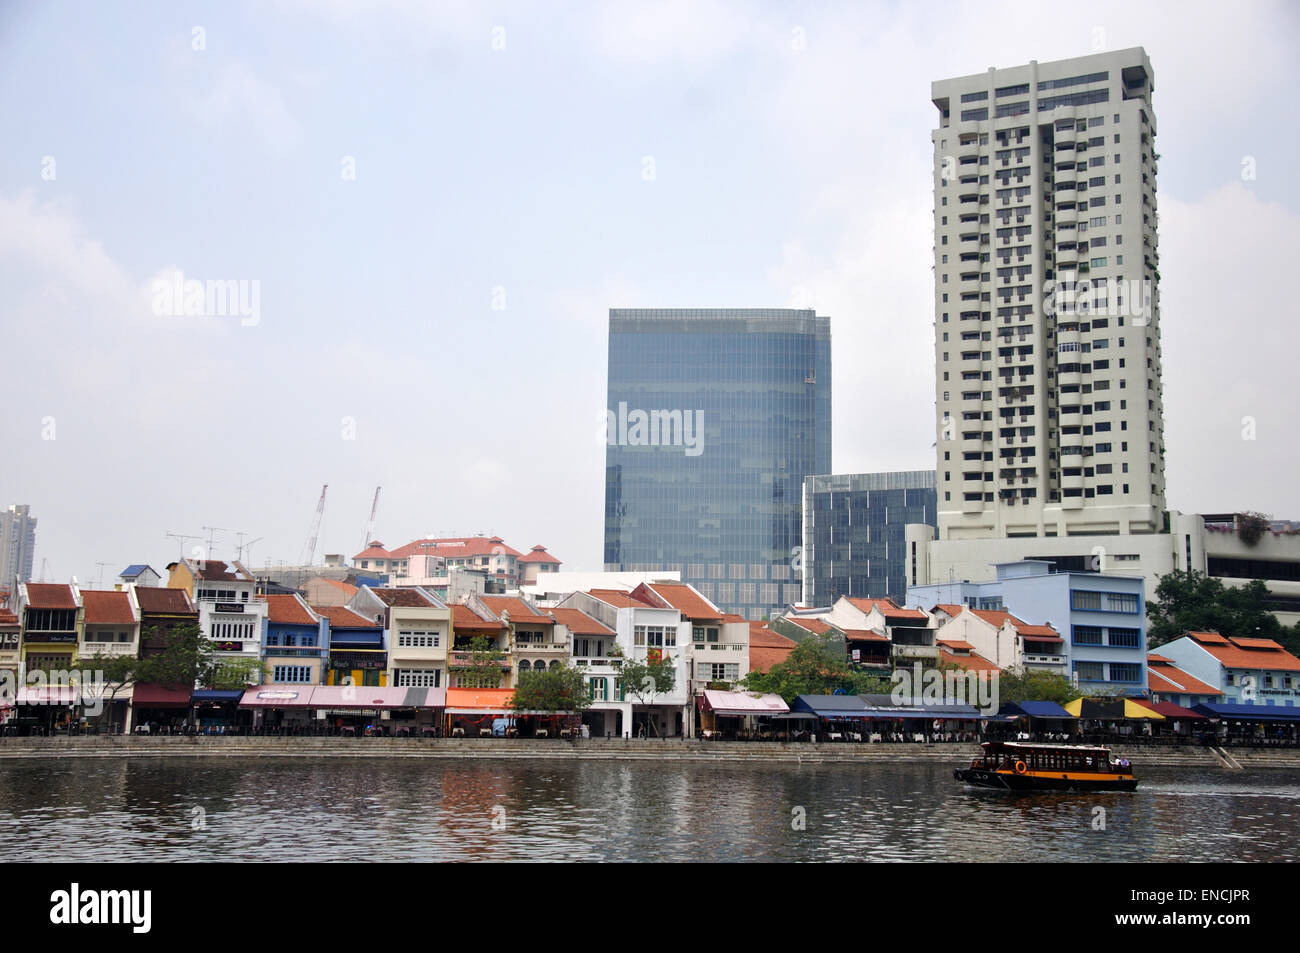 SINGAPORE, FEBRUARY 13: A ferry carries passengers through a retail district on February 13, 2009 in Singapore city Stock Photo